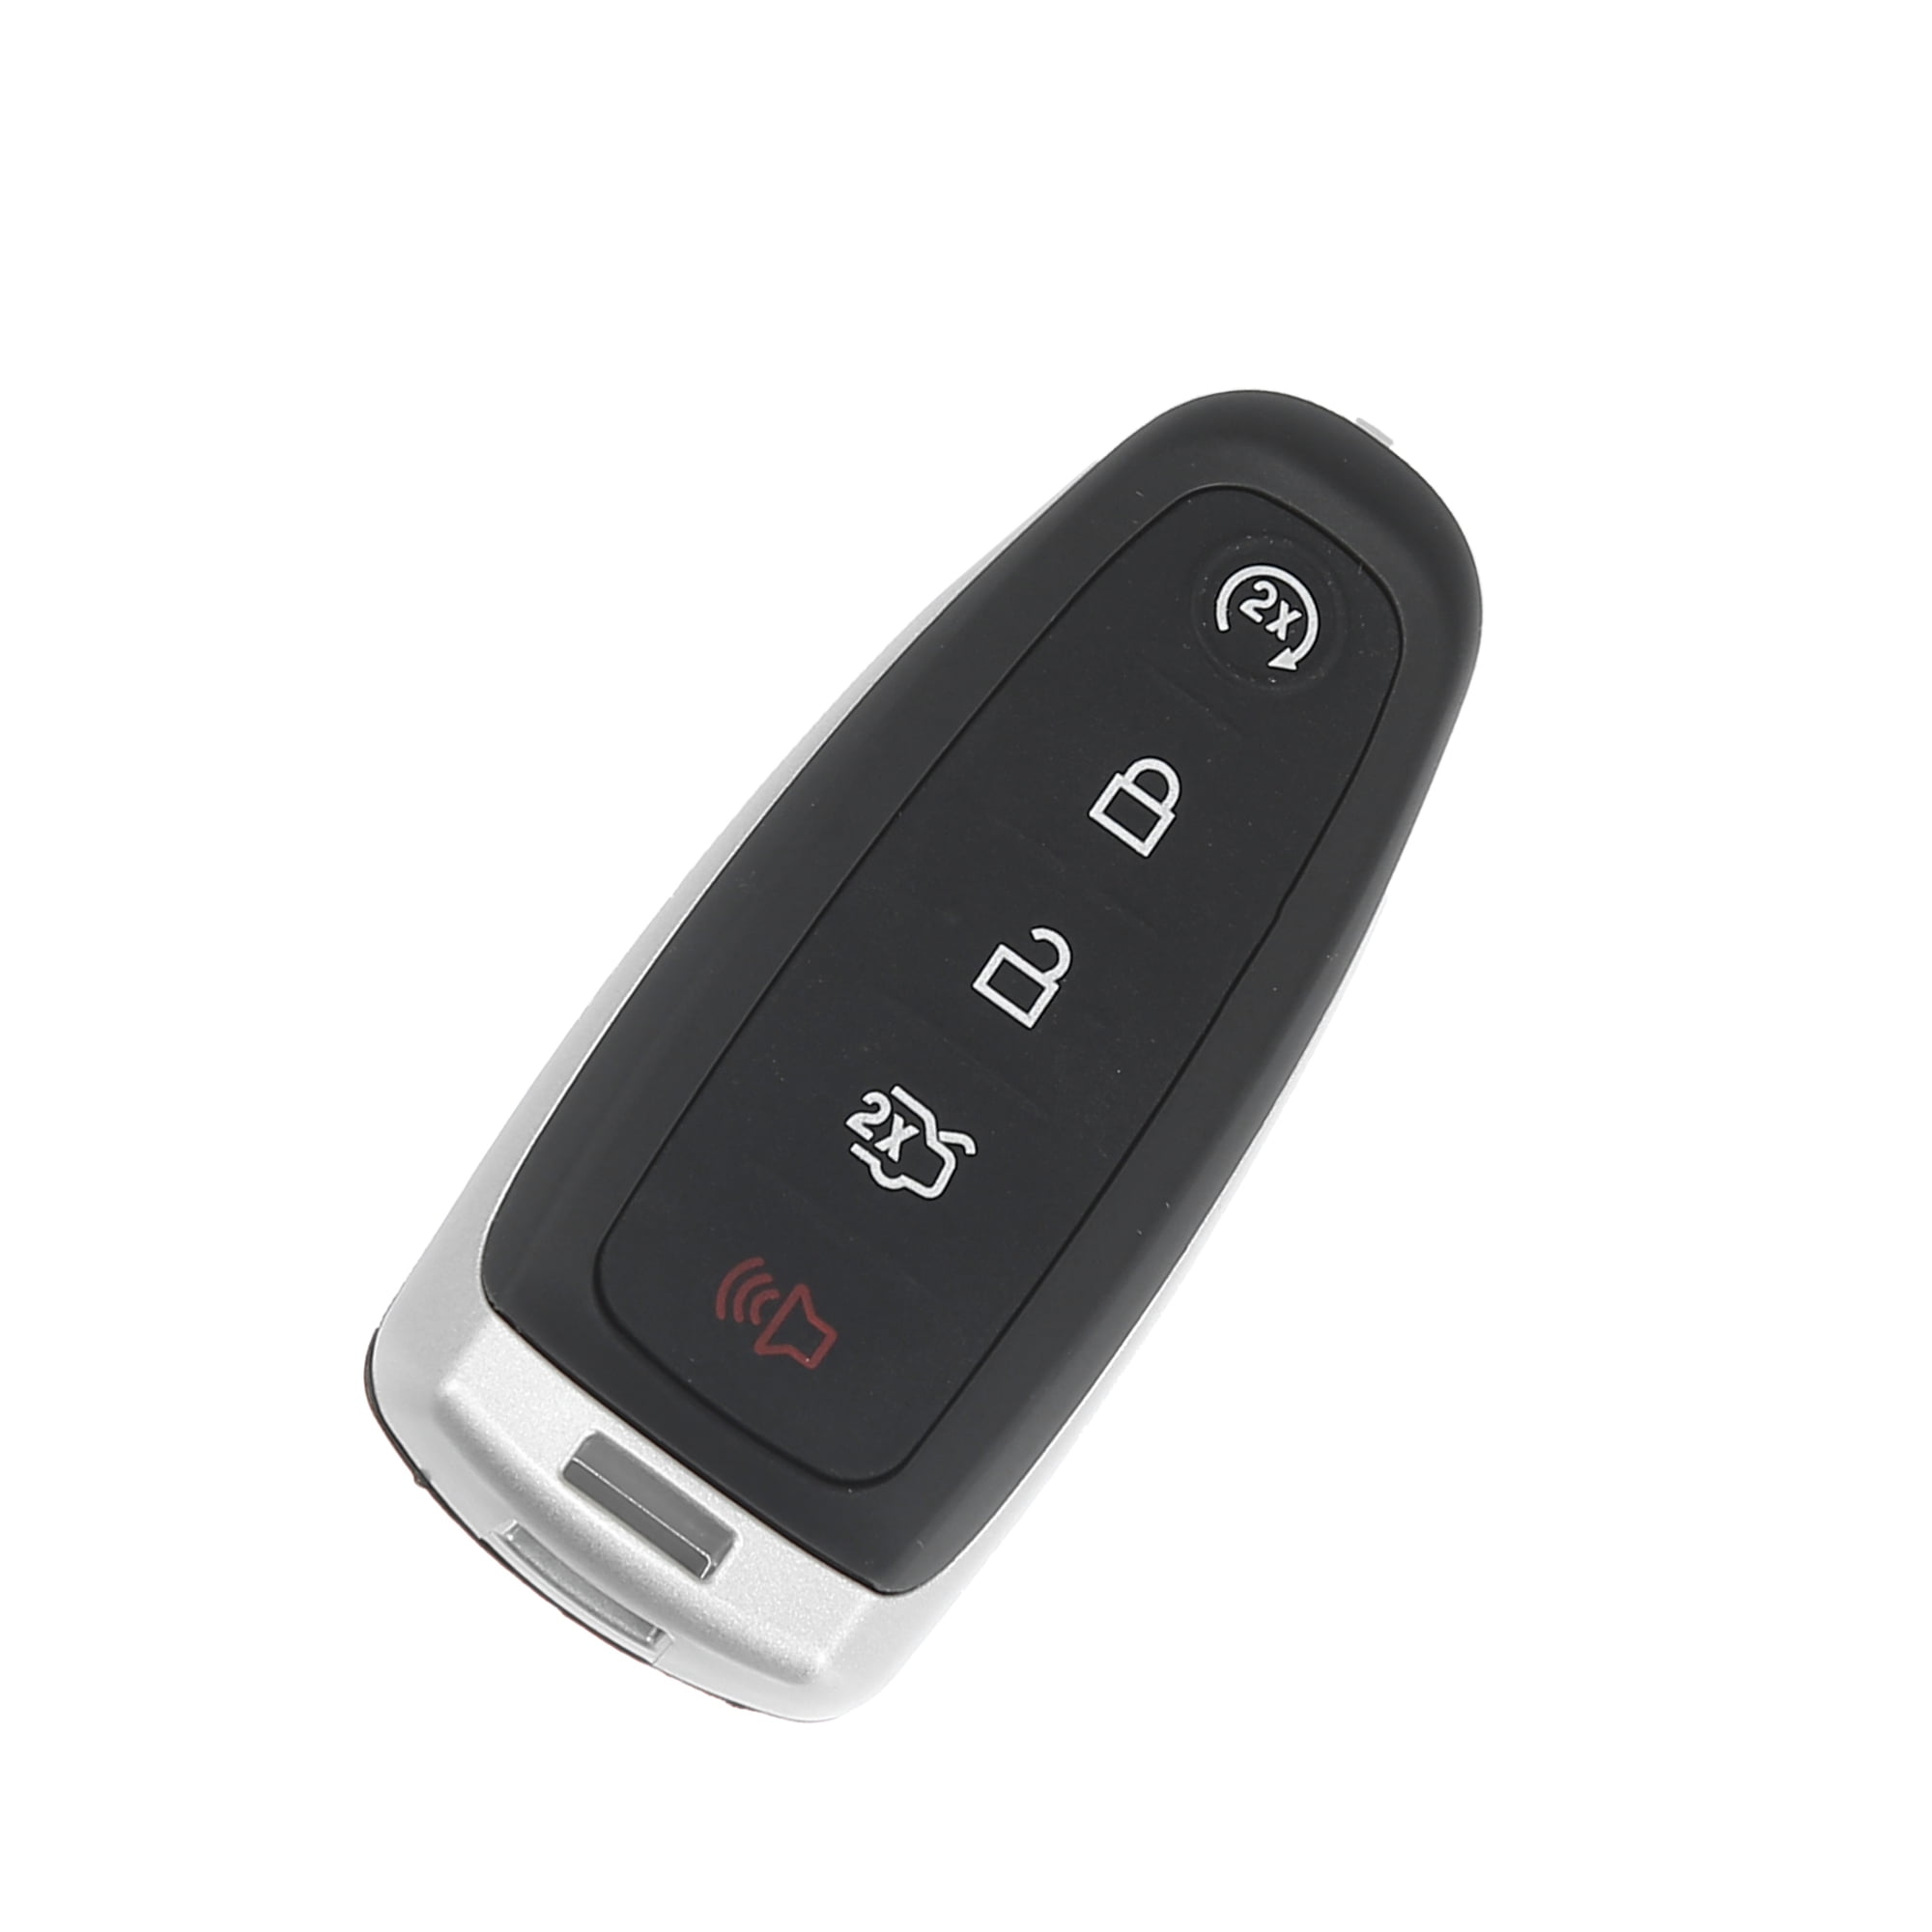 KeylessOption Keyless Entry Car Remote Start Smart Key Fob for Ford Lincoln M3N5WY8609 Pack of 2 